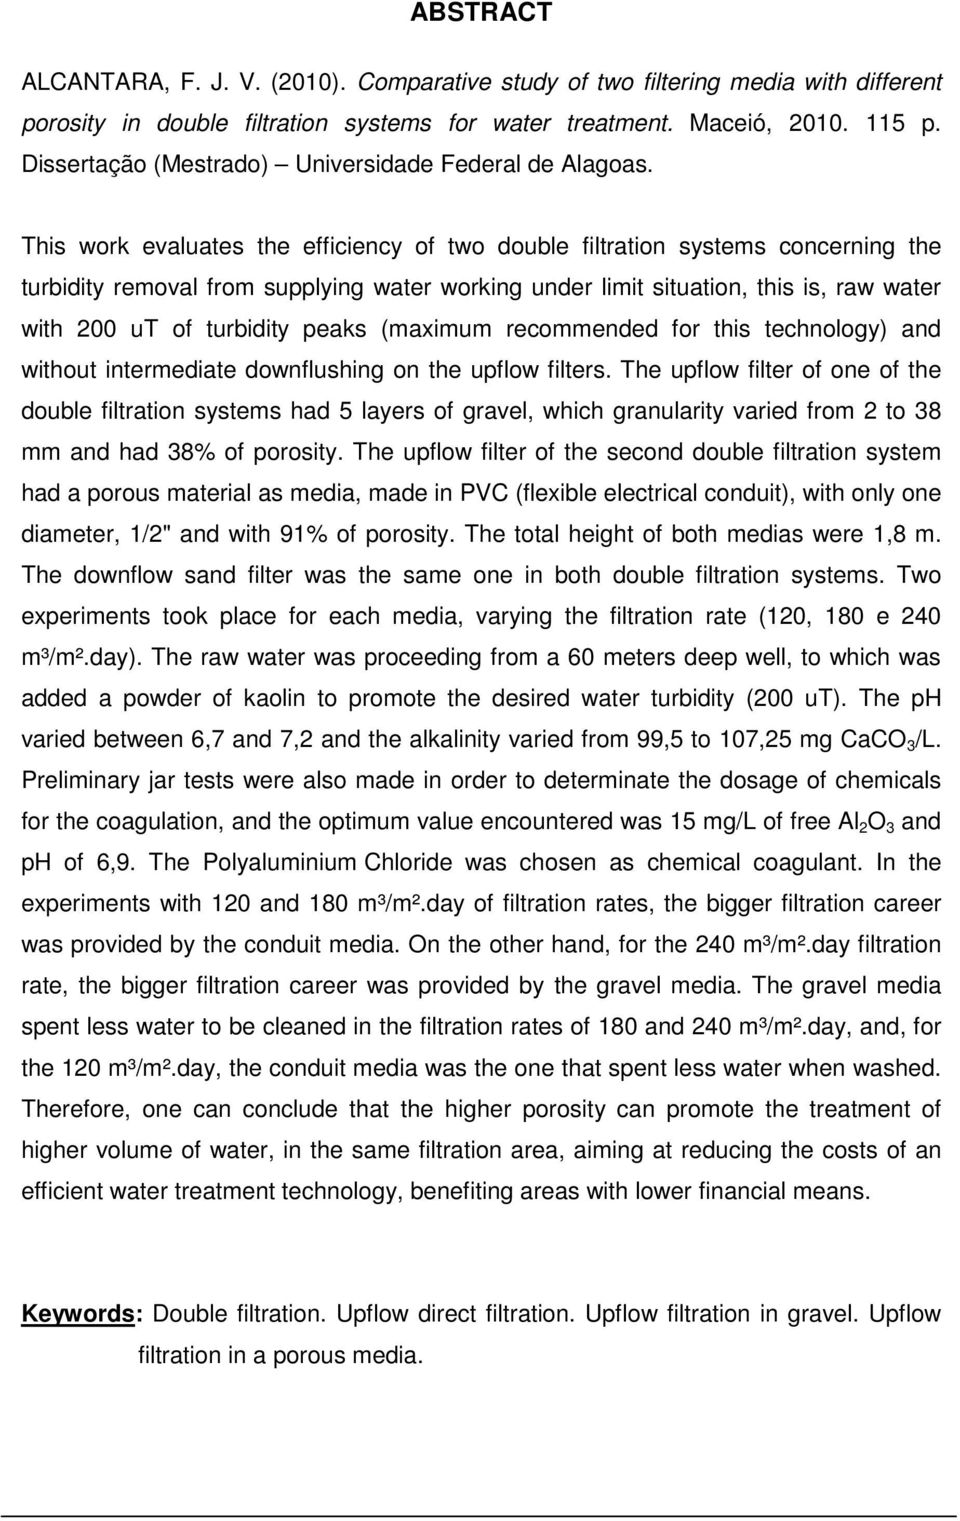 This work evaluates the efficiency of two double filtration systems concerning the turbidity removal from supplying water working under limit situation, this is, raw water with 200 ut of turbidity